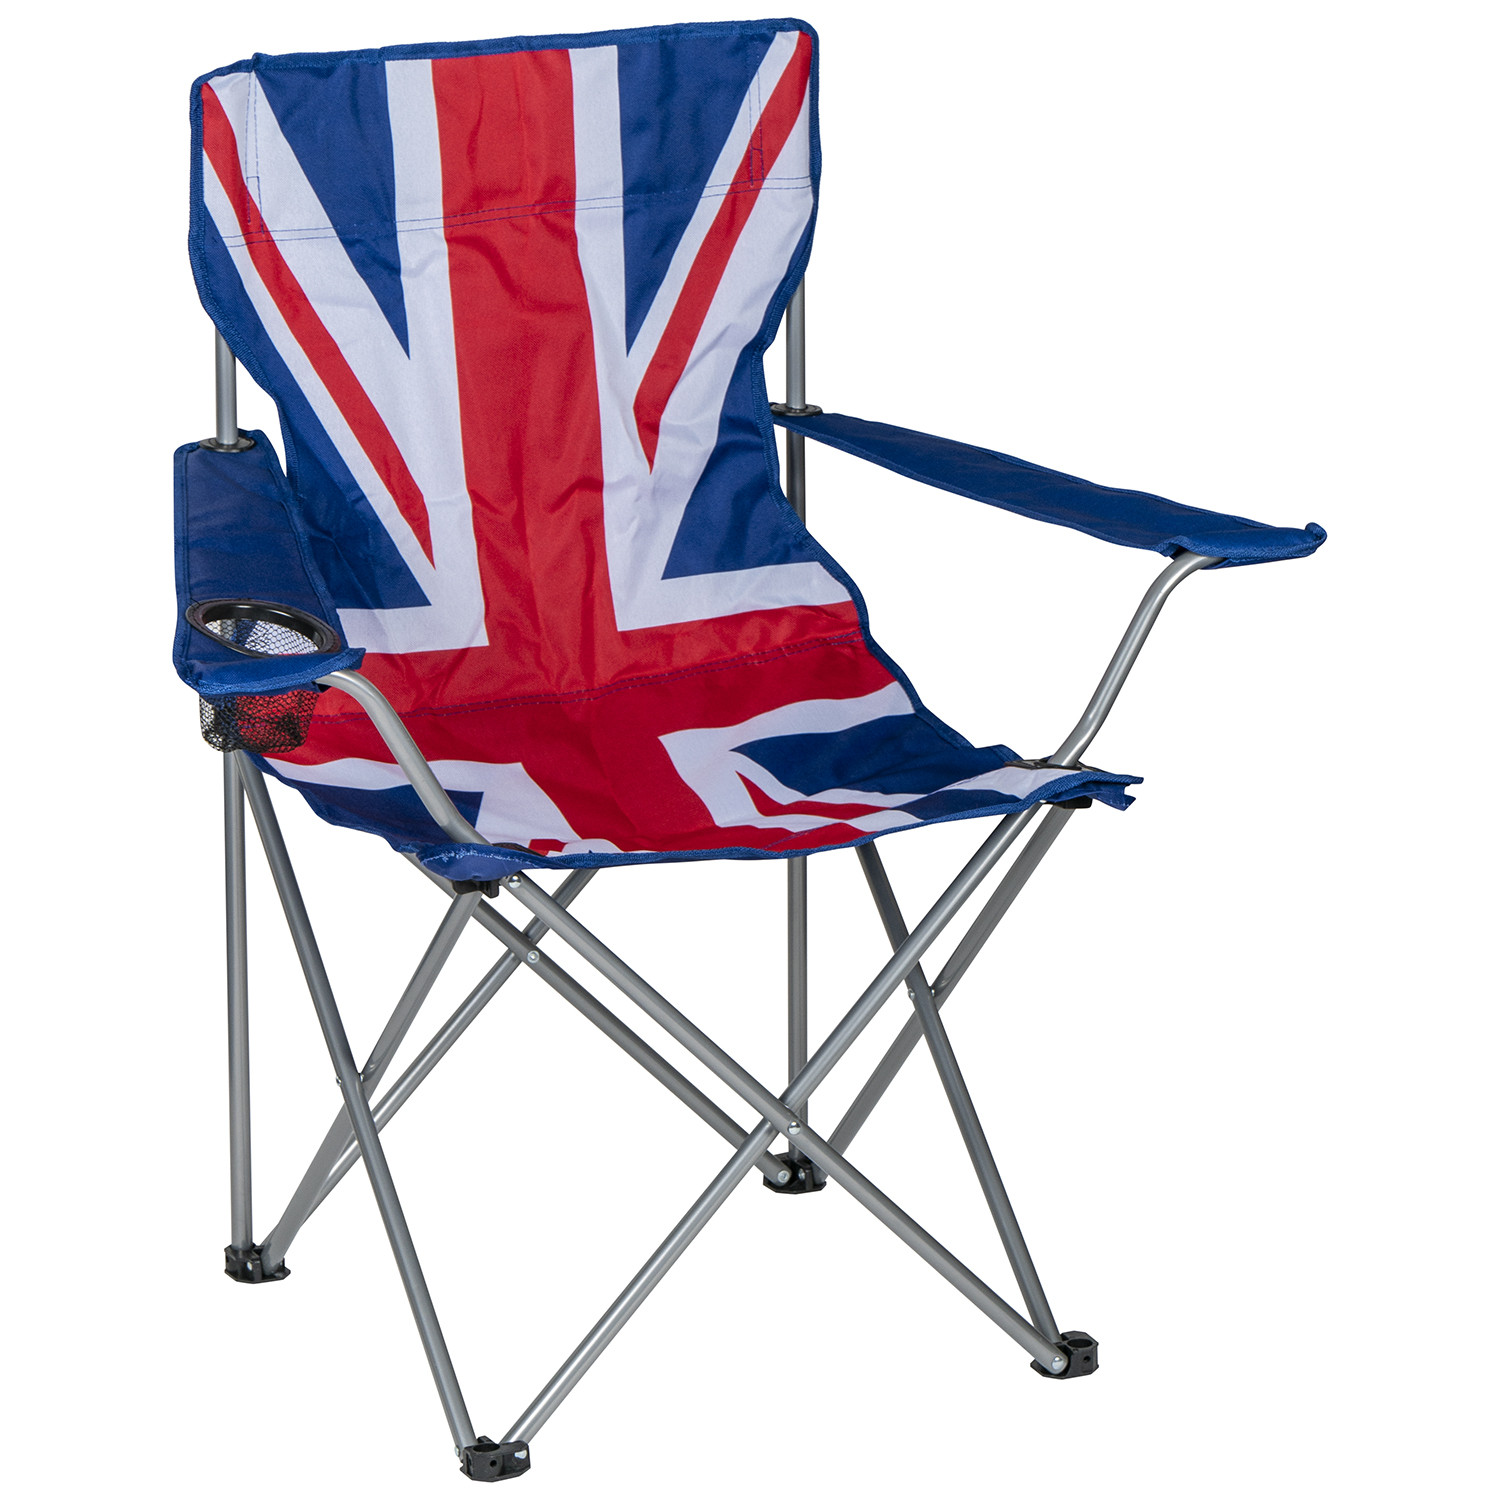 Union Jack Flag Design Camping Chair Image 1